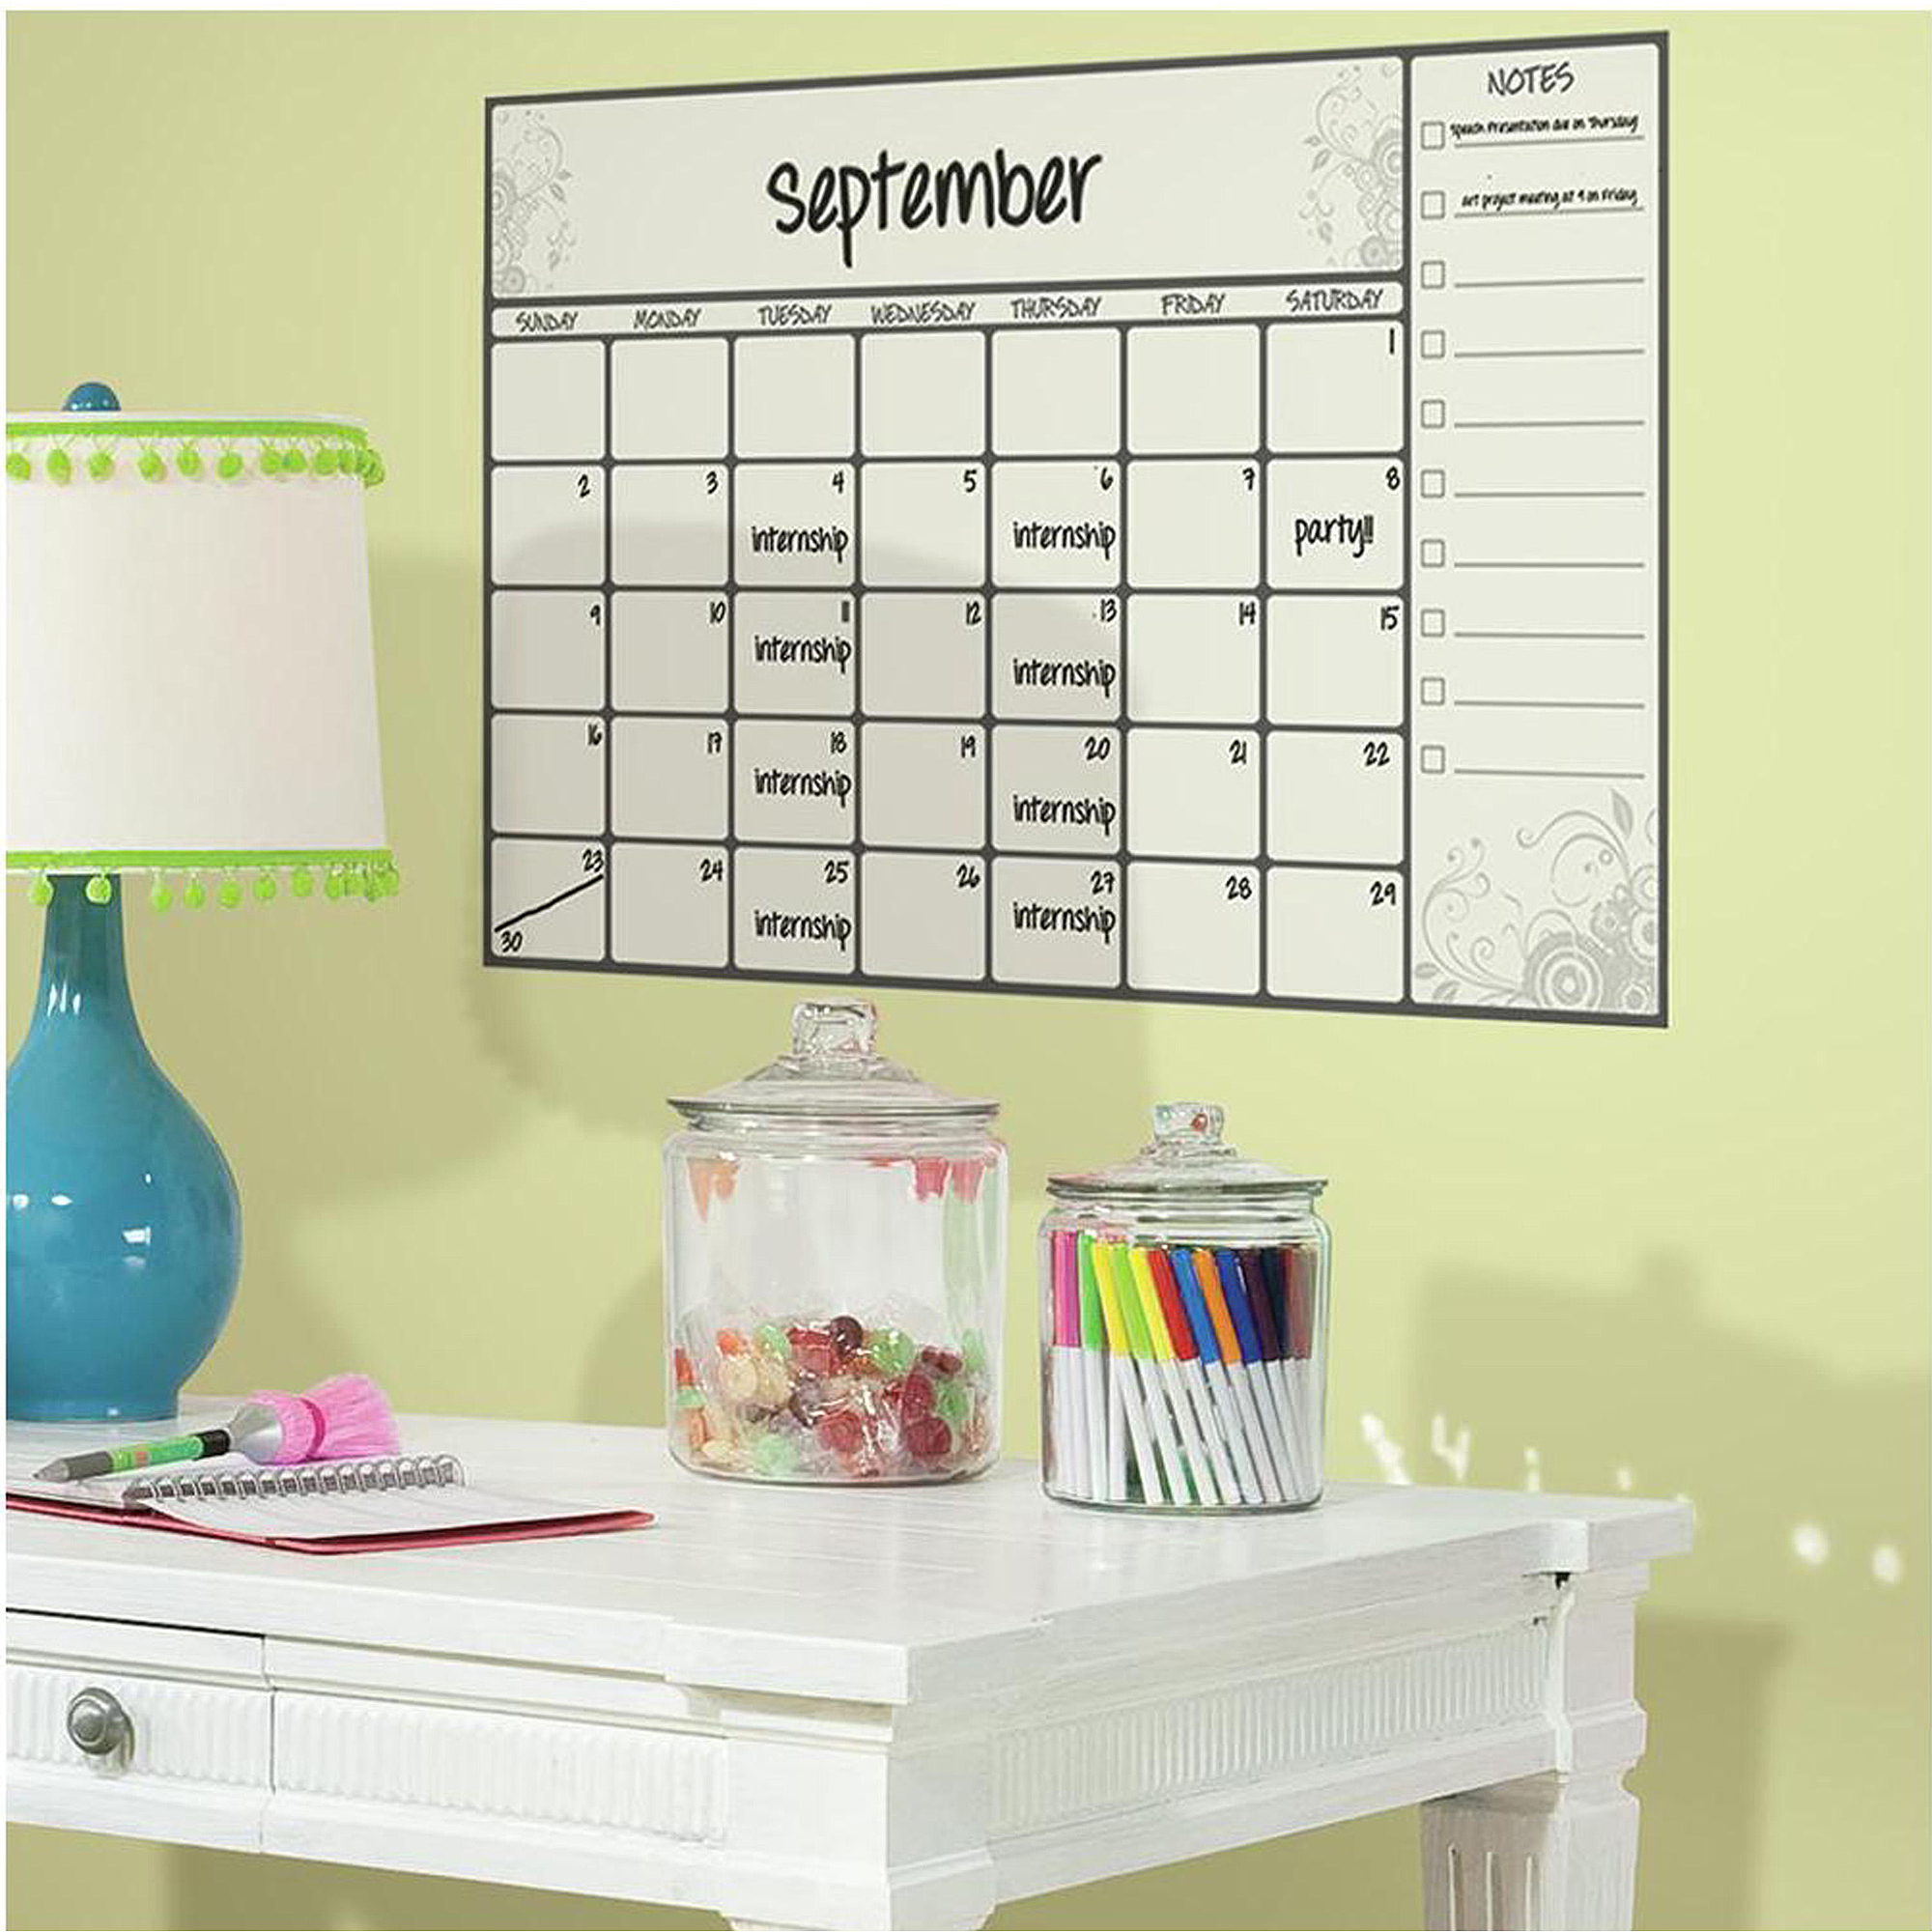 RoomMates Scroll Dry Erase Calendar Peel and Stick Wall Decal